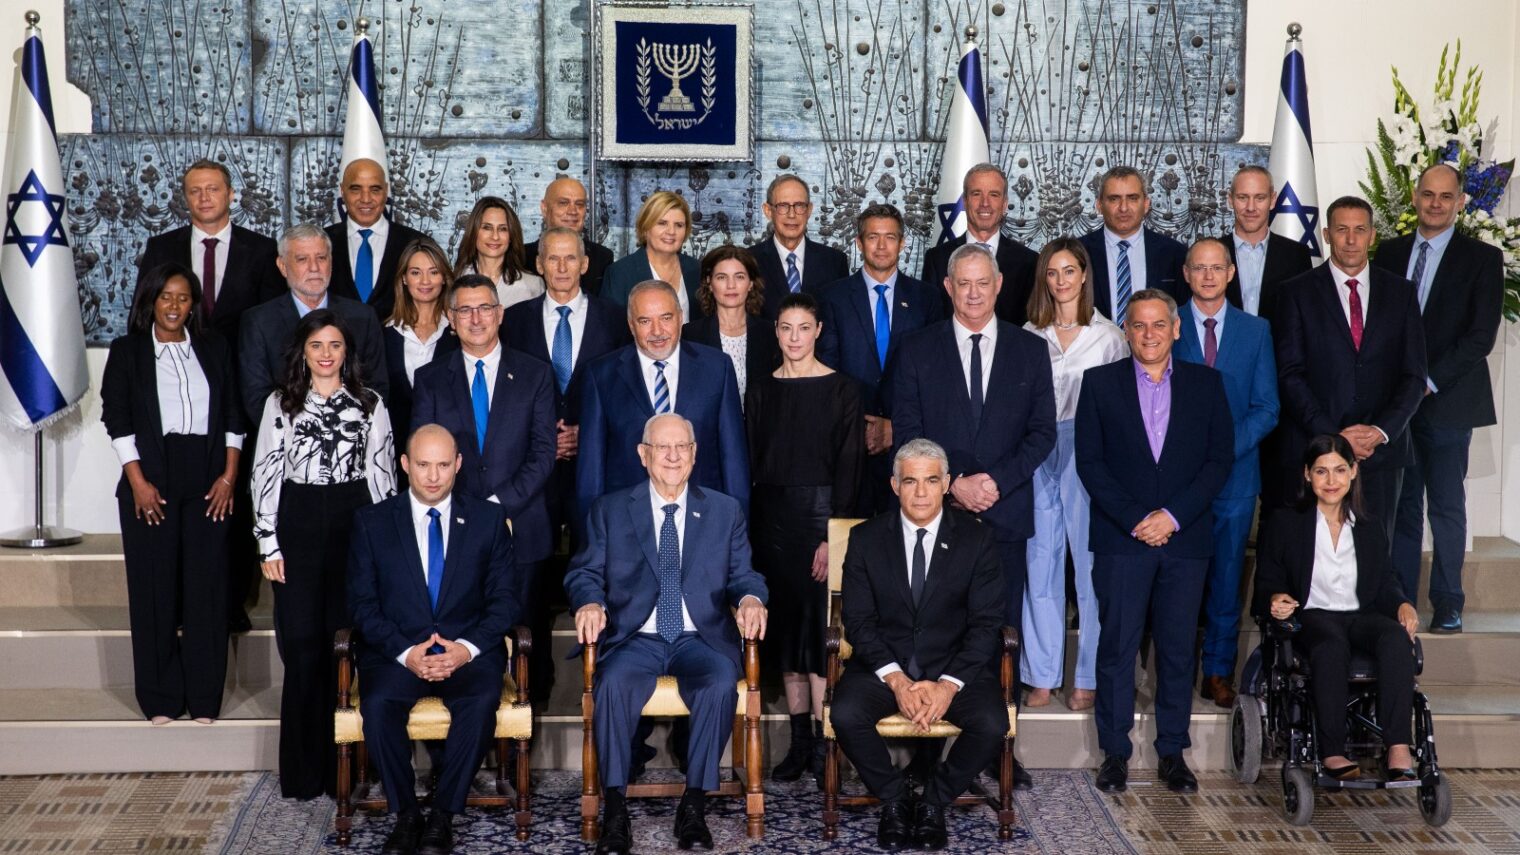 The newly sworn in Israeli government poses for a group photo at the President's Residence in Jerusalem, June 14, 2021. Photo by Yonatan Sindel/Flash90